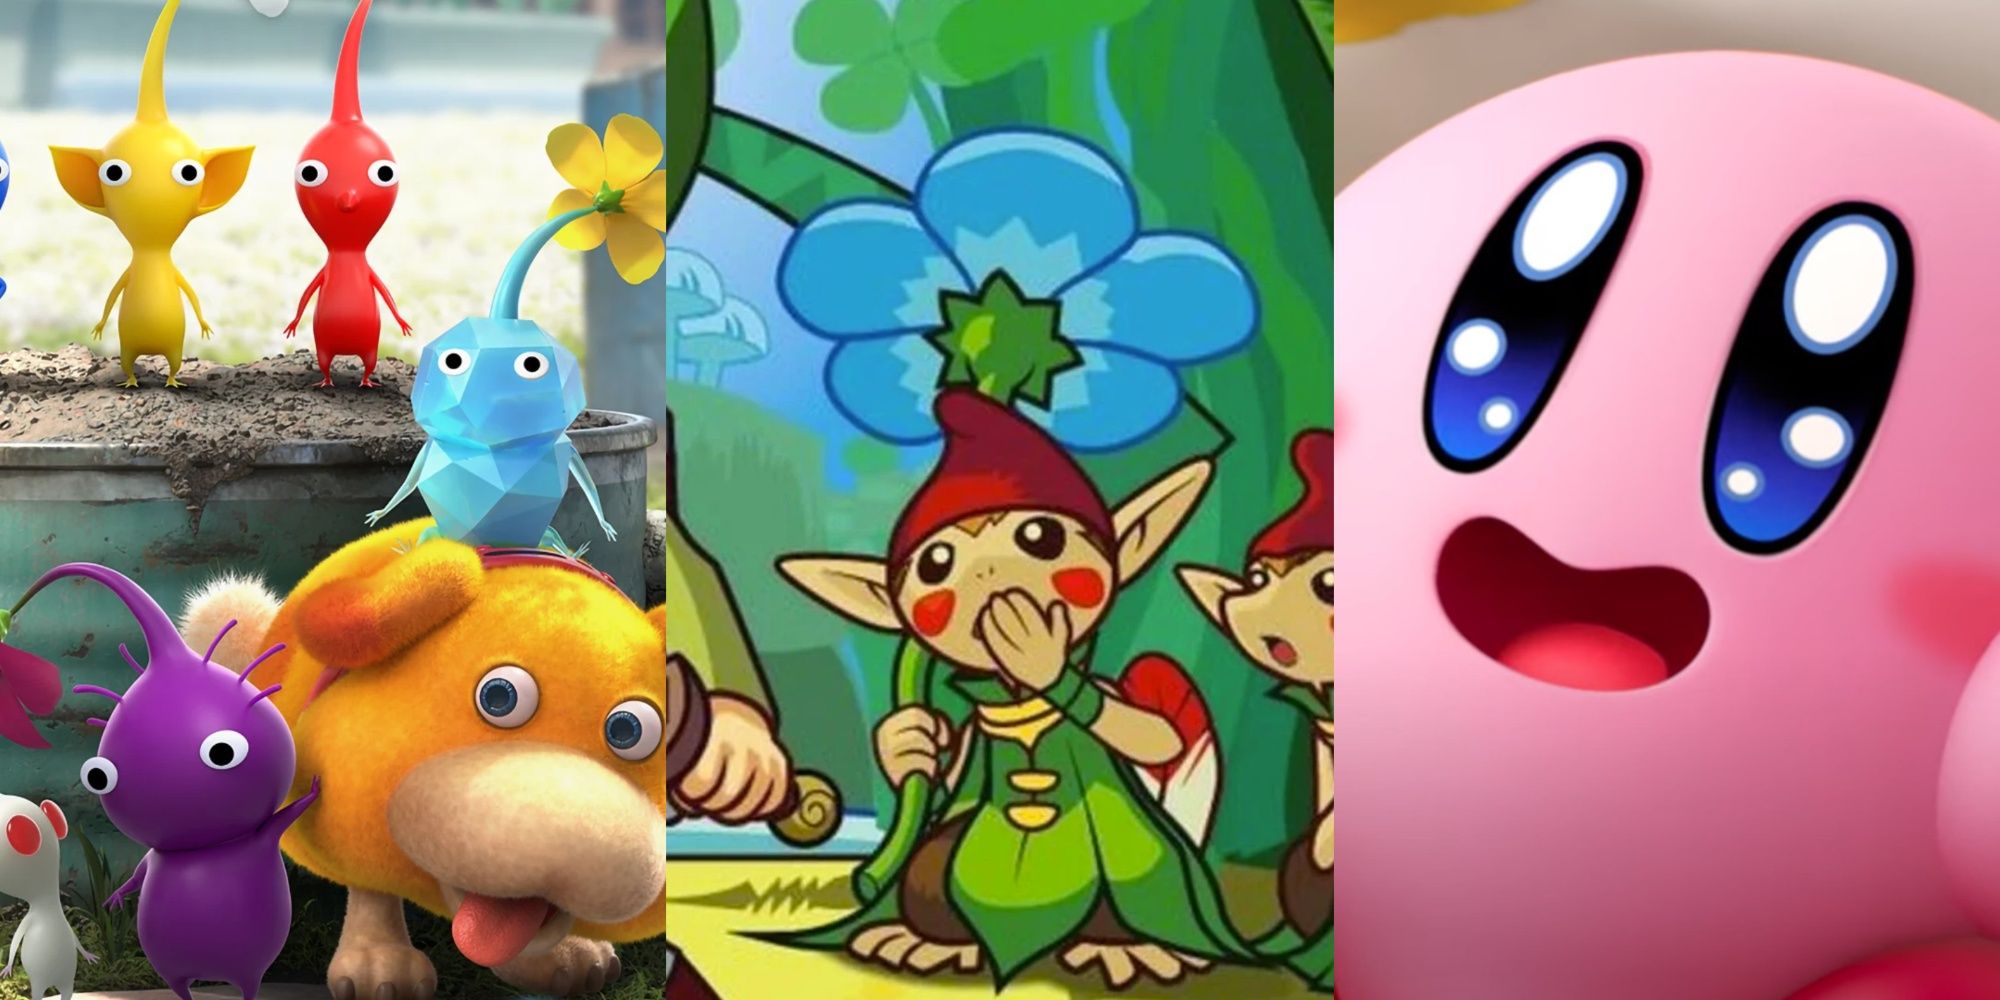 Pikmin, Minish with a flower, and Kirby